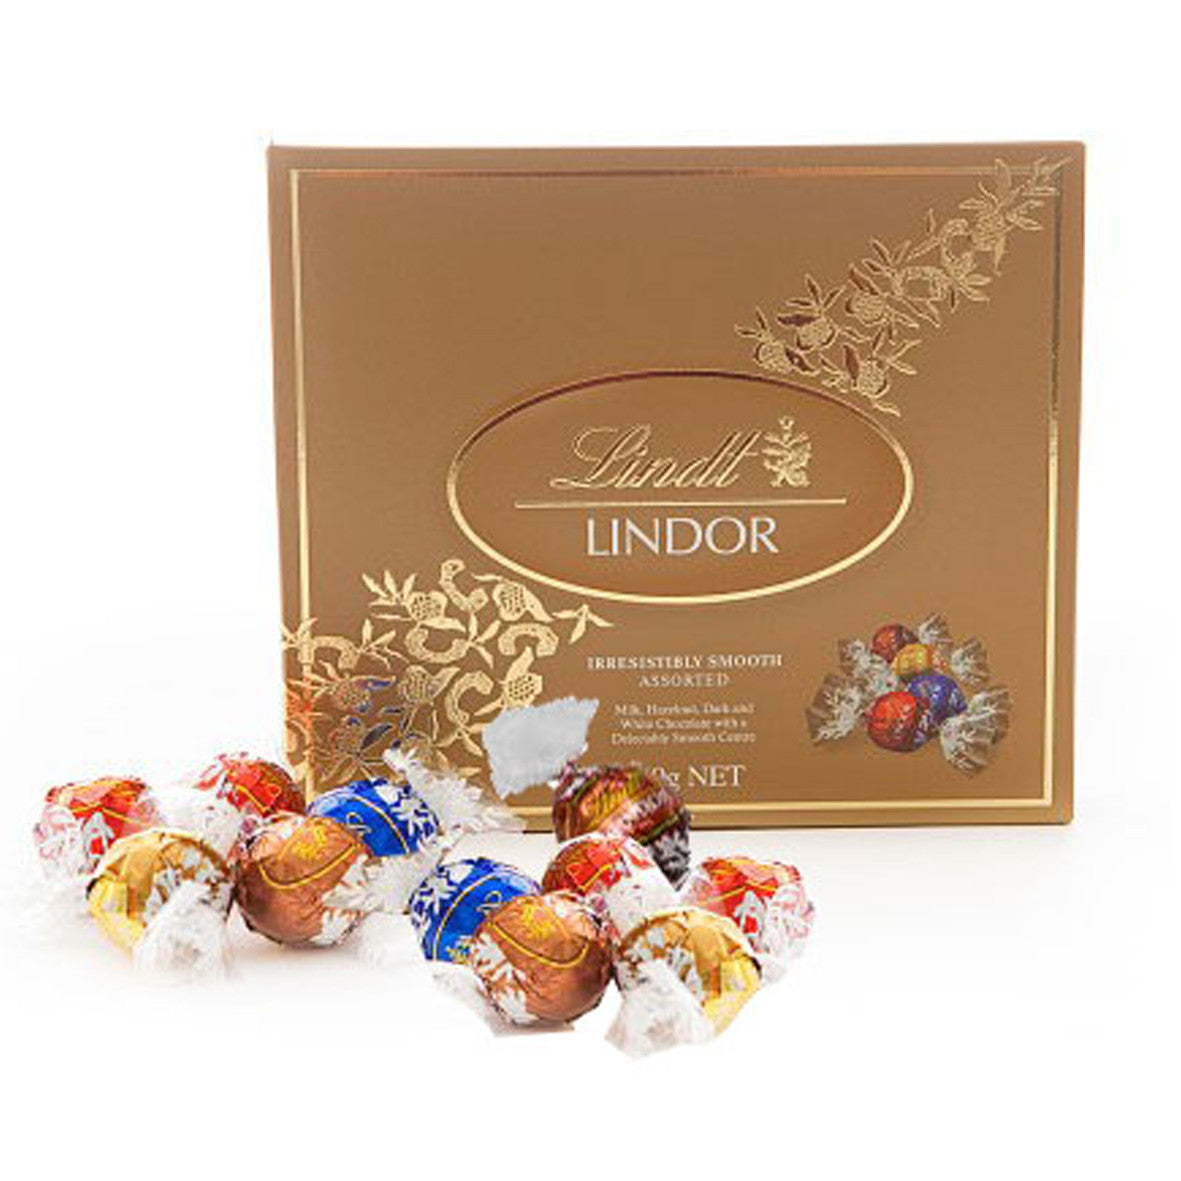 lindt chocolate box additional gift 